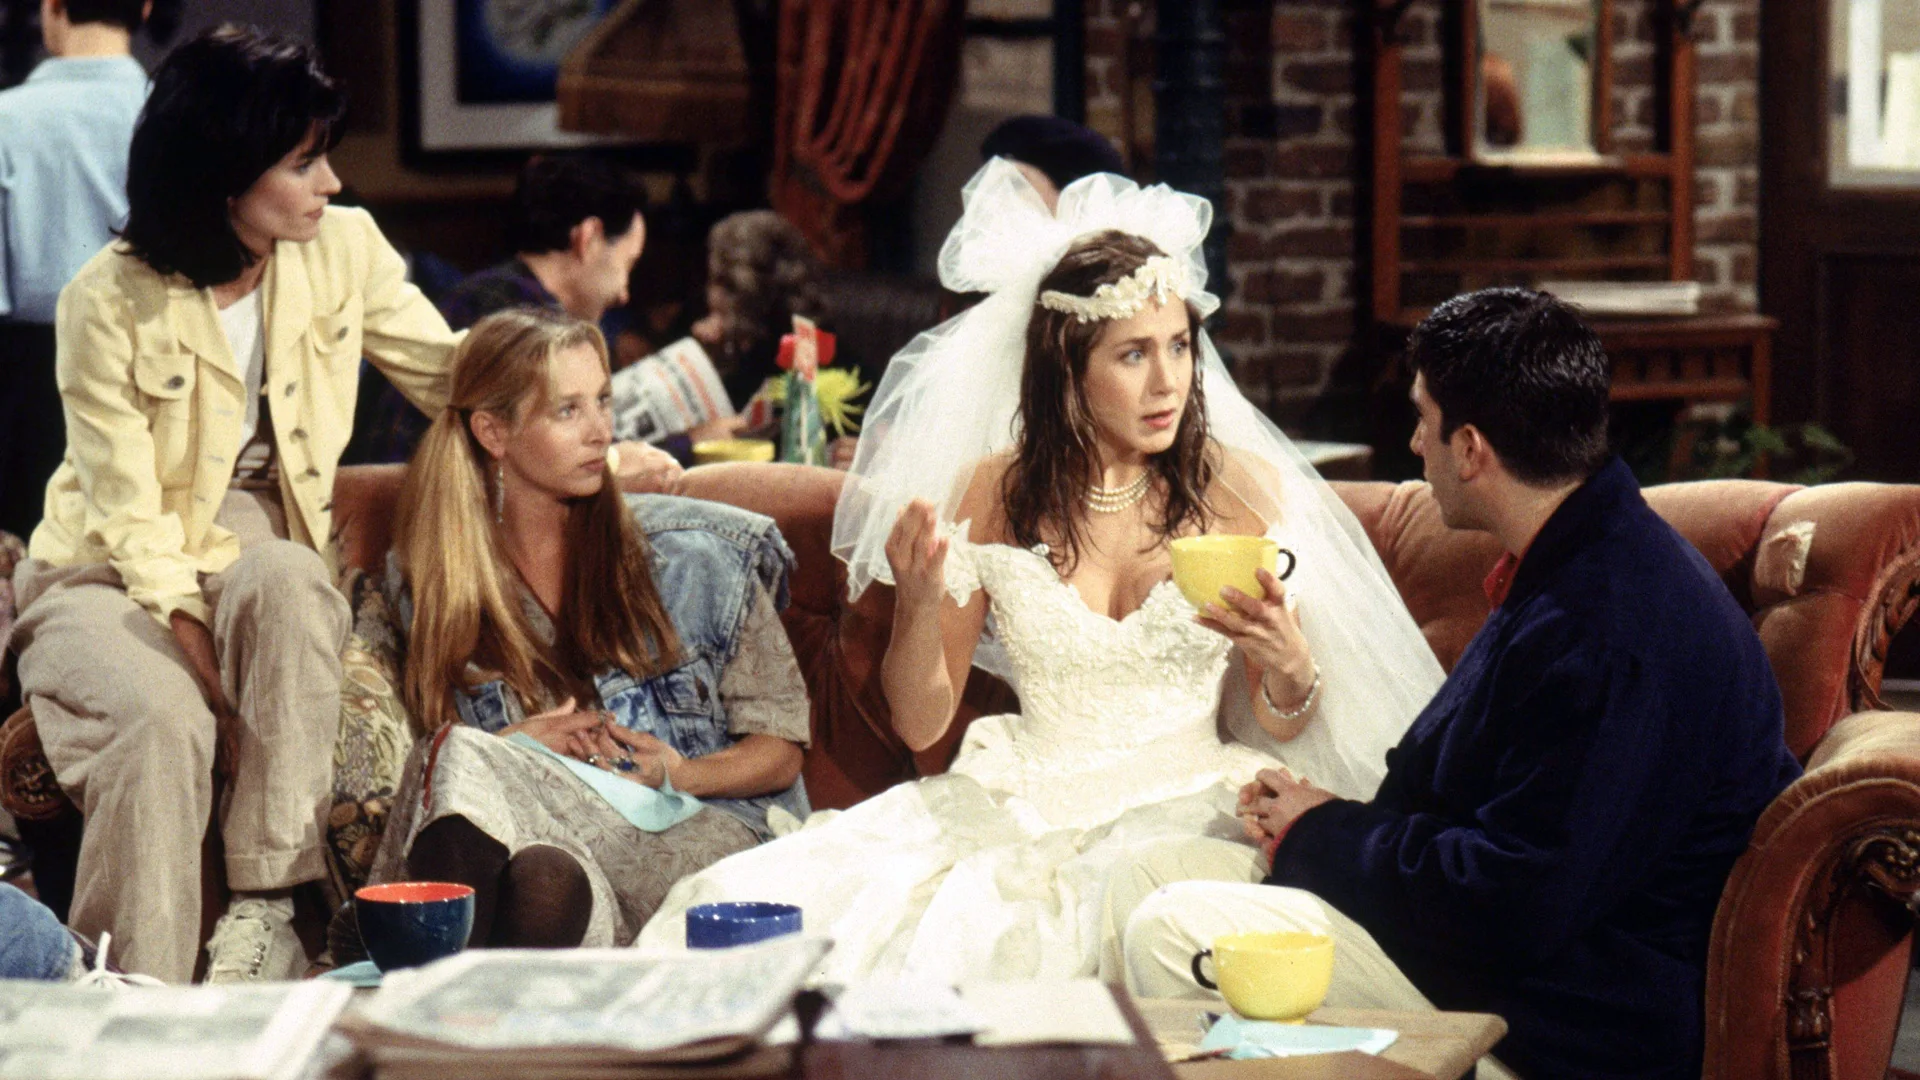 A photograph of a scene from the TV show Friends showing Monica, Phoebe, Rachel and Ross sat in the coffee shop looking concerned. Rachel is wearing a wedding dress and holding a yellow cup. The background has a brick wall.